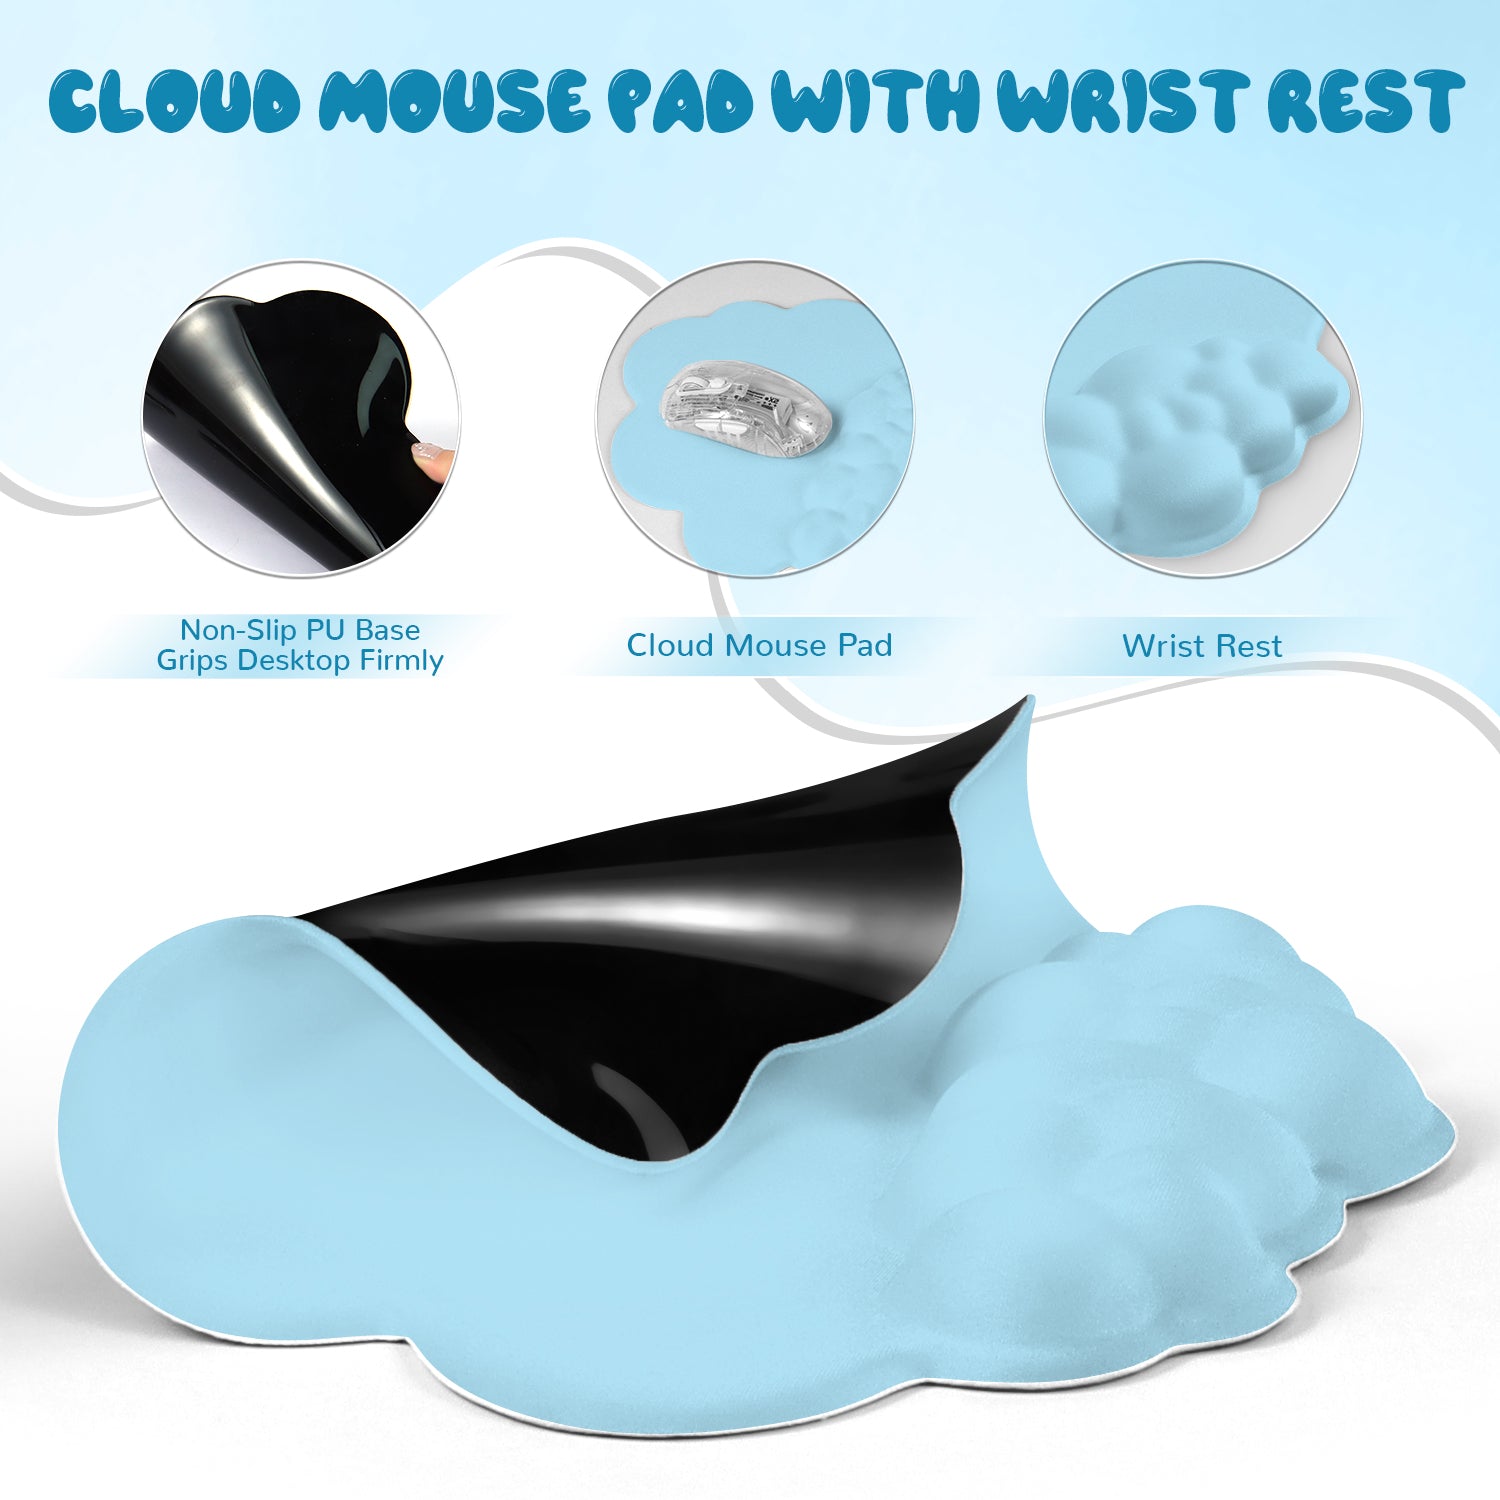 MAMBASNAKE Cloud Mouse Pad with Wrist Rest Support,Ergonomic Mouse Mat,Non-Slip Base for Comfortable and Precise Control